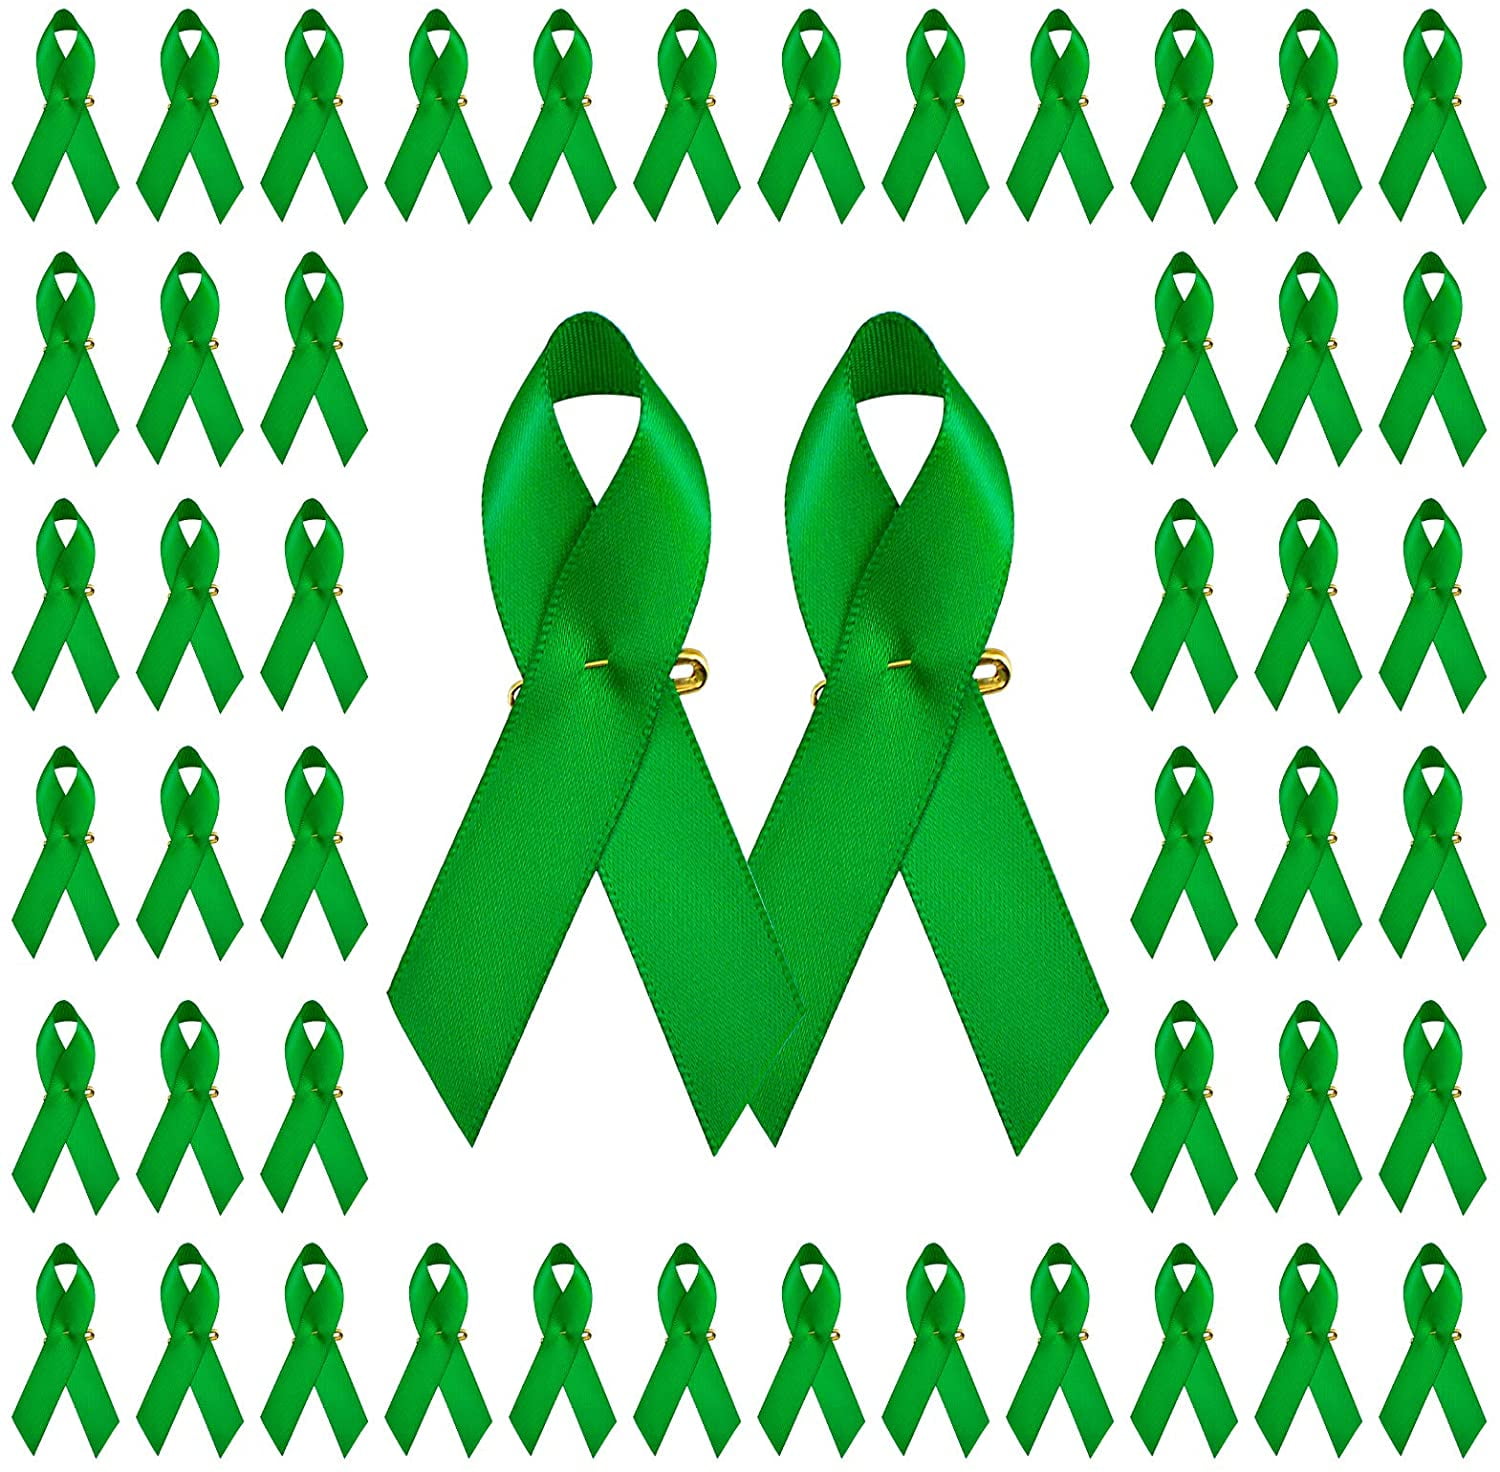 Awareness Ribbons: What Does a Green Ribbon Mean?